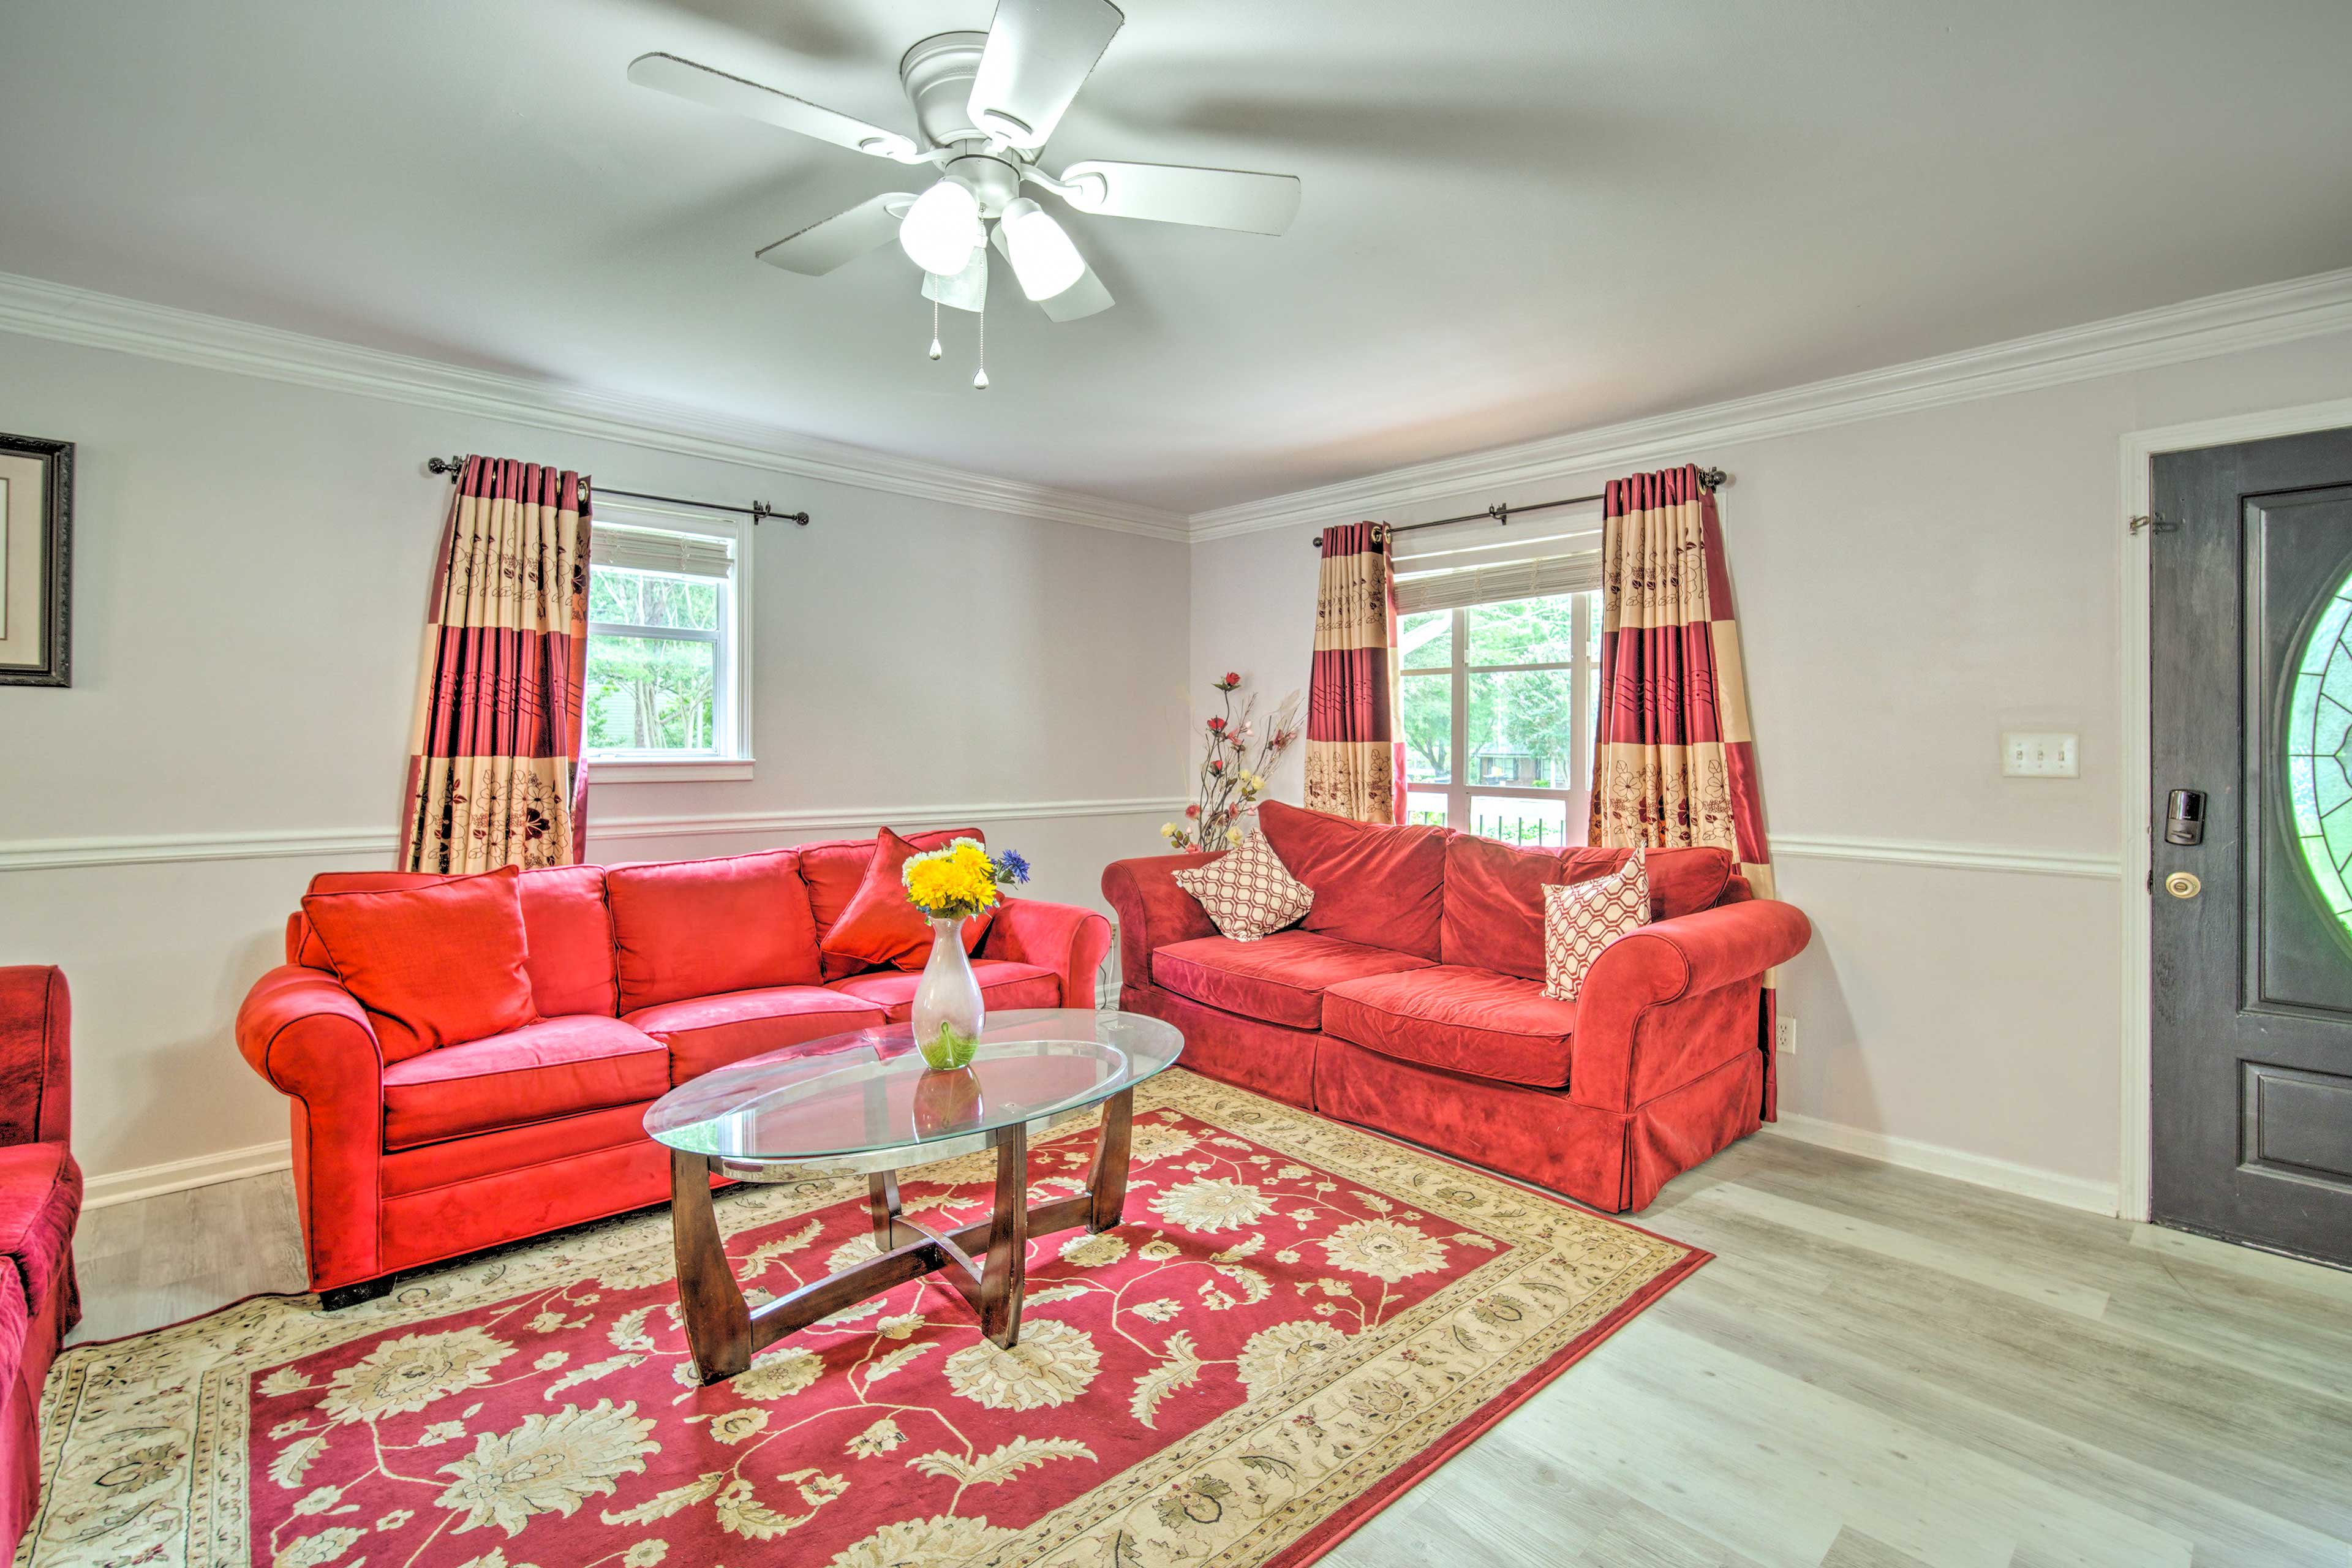 Living Room | Free WiFi | Central Heating & A/C | Sleeper Sofa | DVD Player